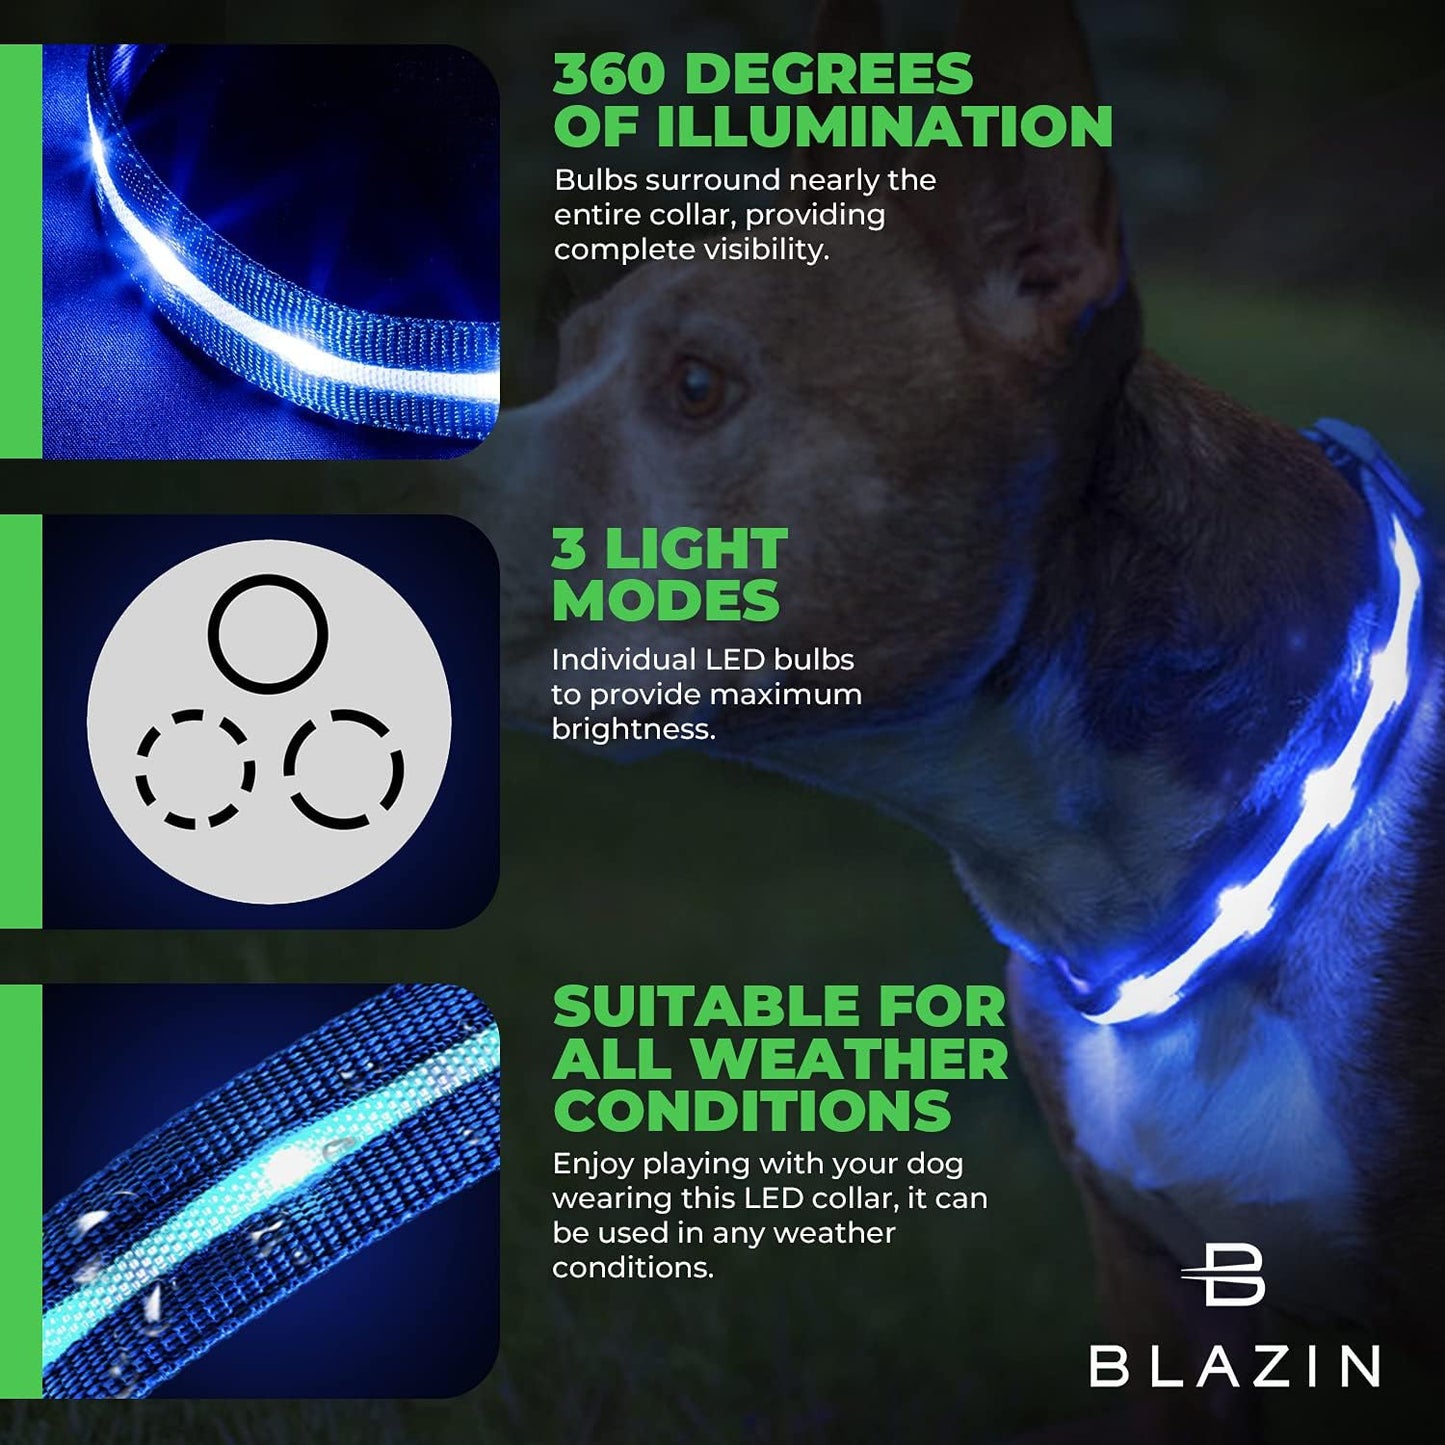 Light up Dog Collars with 1,000 Feet of Visibility - Brightest Glow Dog Collar Light - USB Rechargeable Waterproof LED Dog Collar - Dog Lights for Night Walking Keeps Your Pets Safe in the Dark